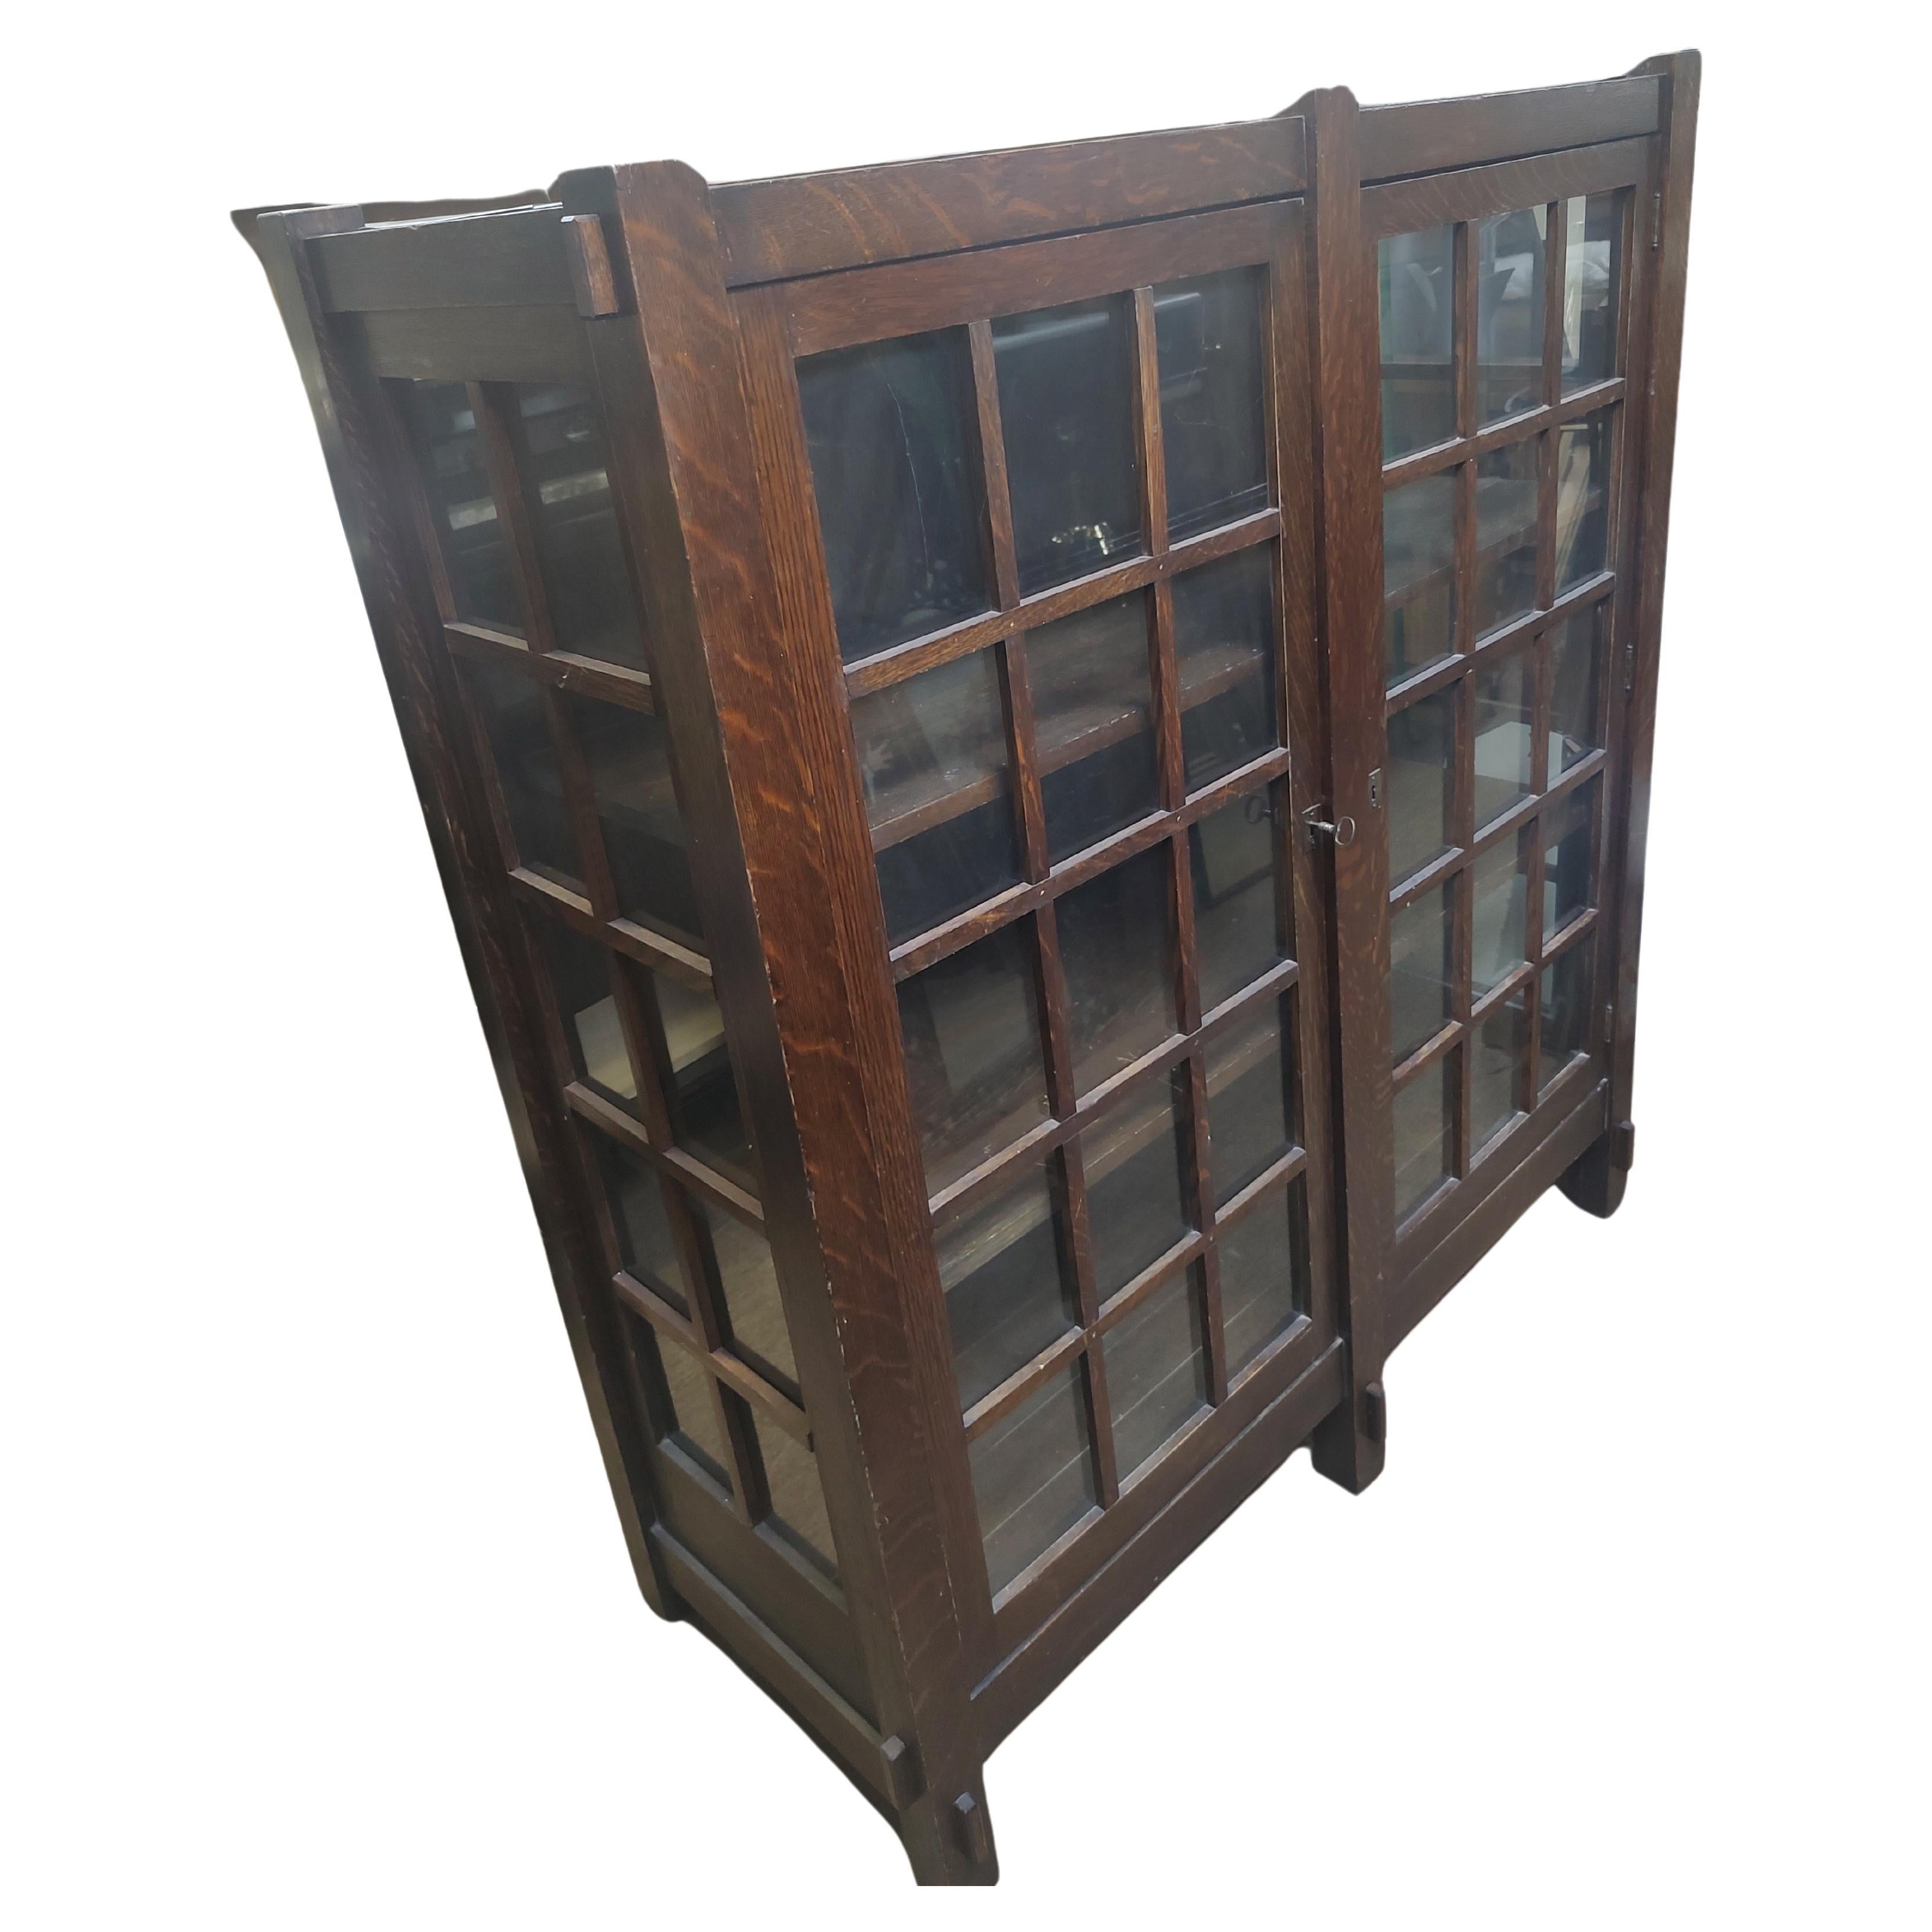 Large and fantastic 2 door arts & crafts mission  cabinet. China Closet with deep shelves or a Bookcase, Has glass sides. All quarter sawn oak with a fabulous style. Thick post with the individual pane of glass style, actually just one large pane on